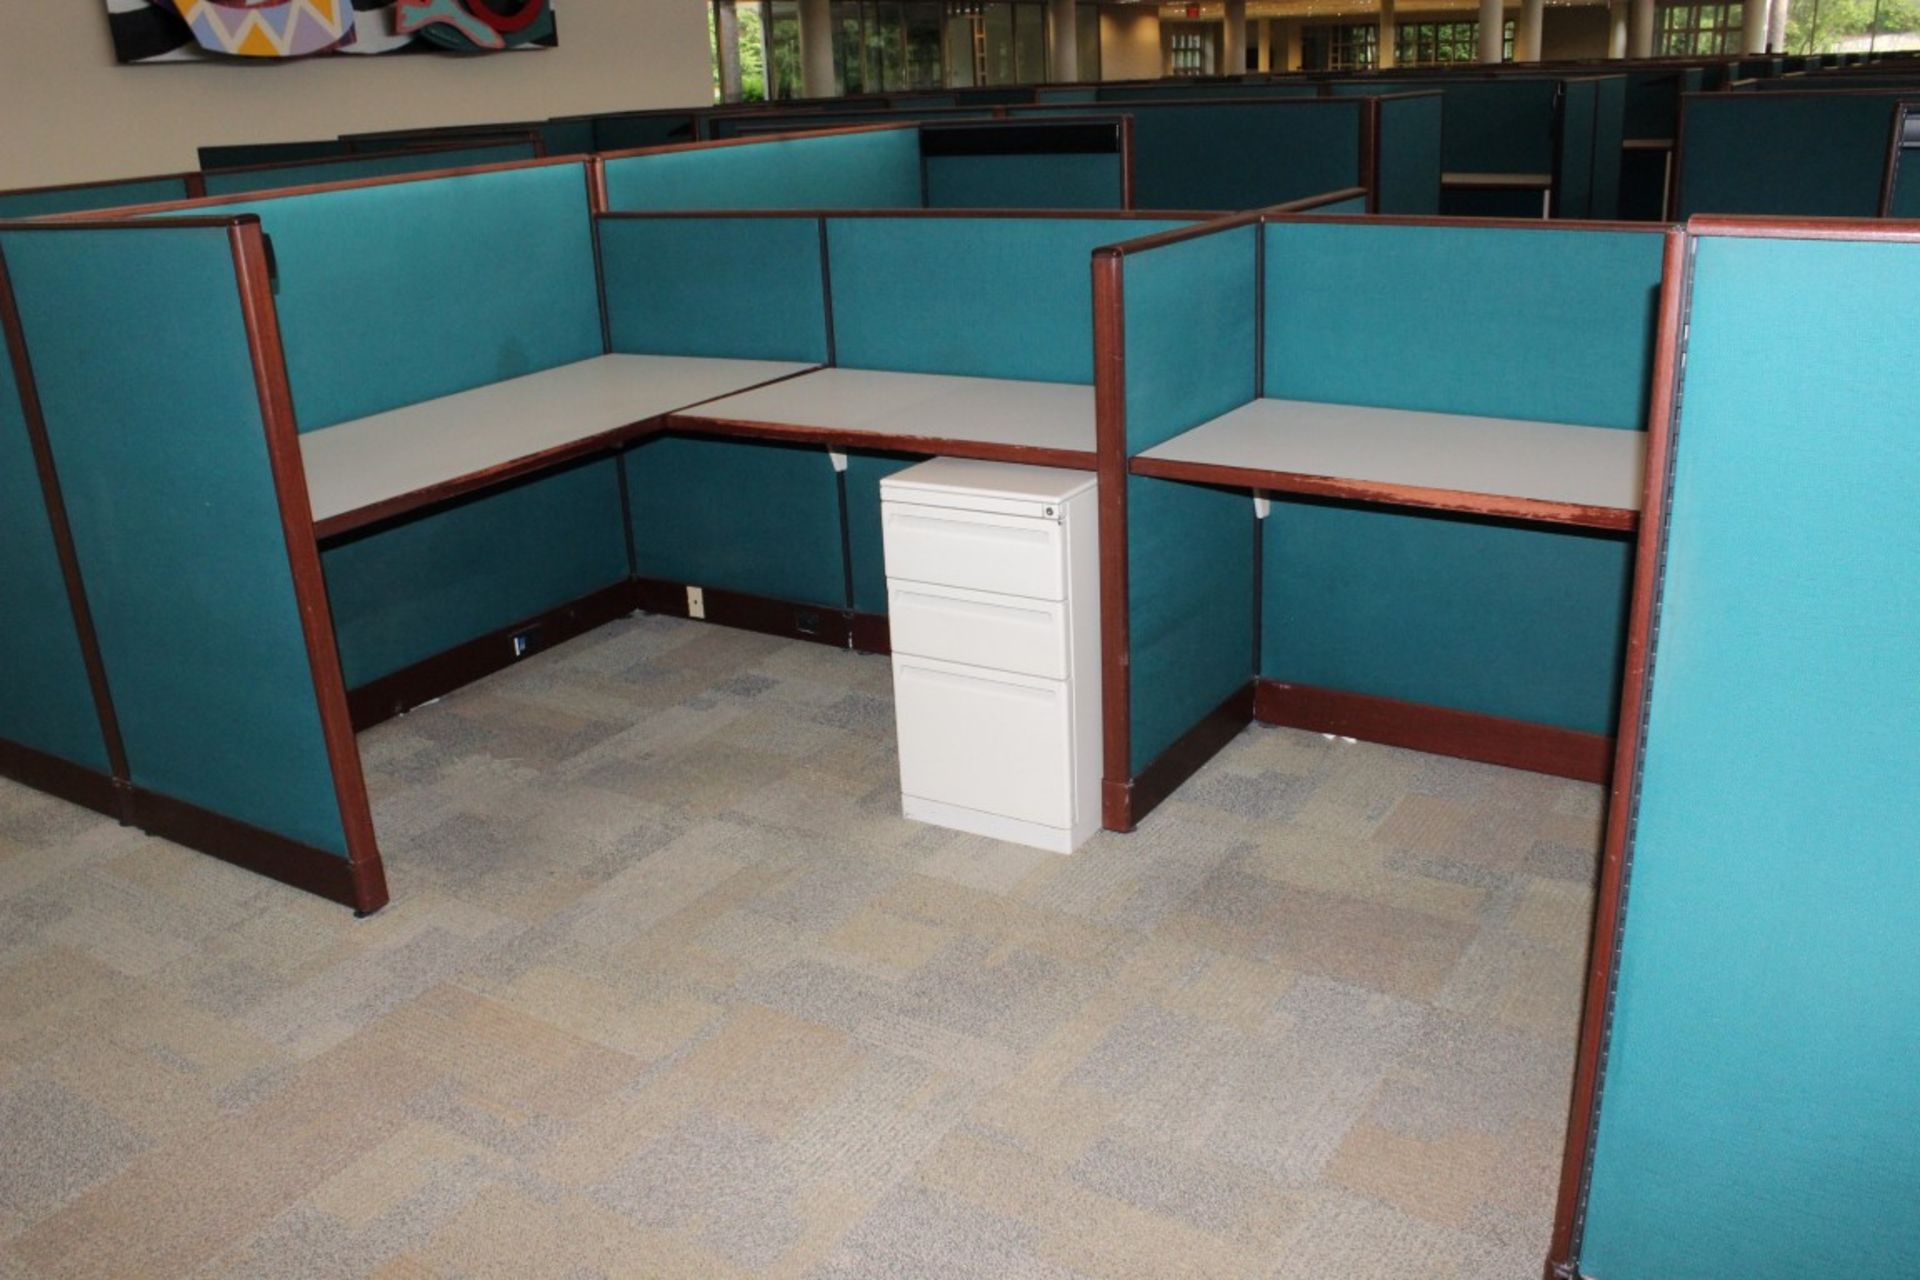 EXECUTIVE OFFICE CUBICLES. DISMANTLED & READY TO LOAD - Image 11 of 15